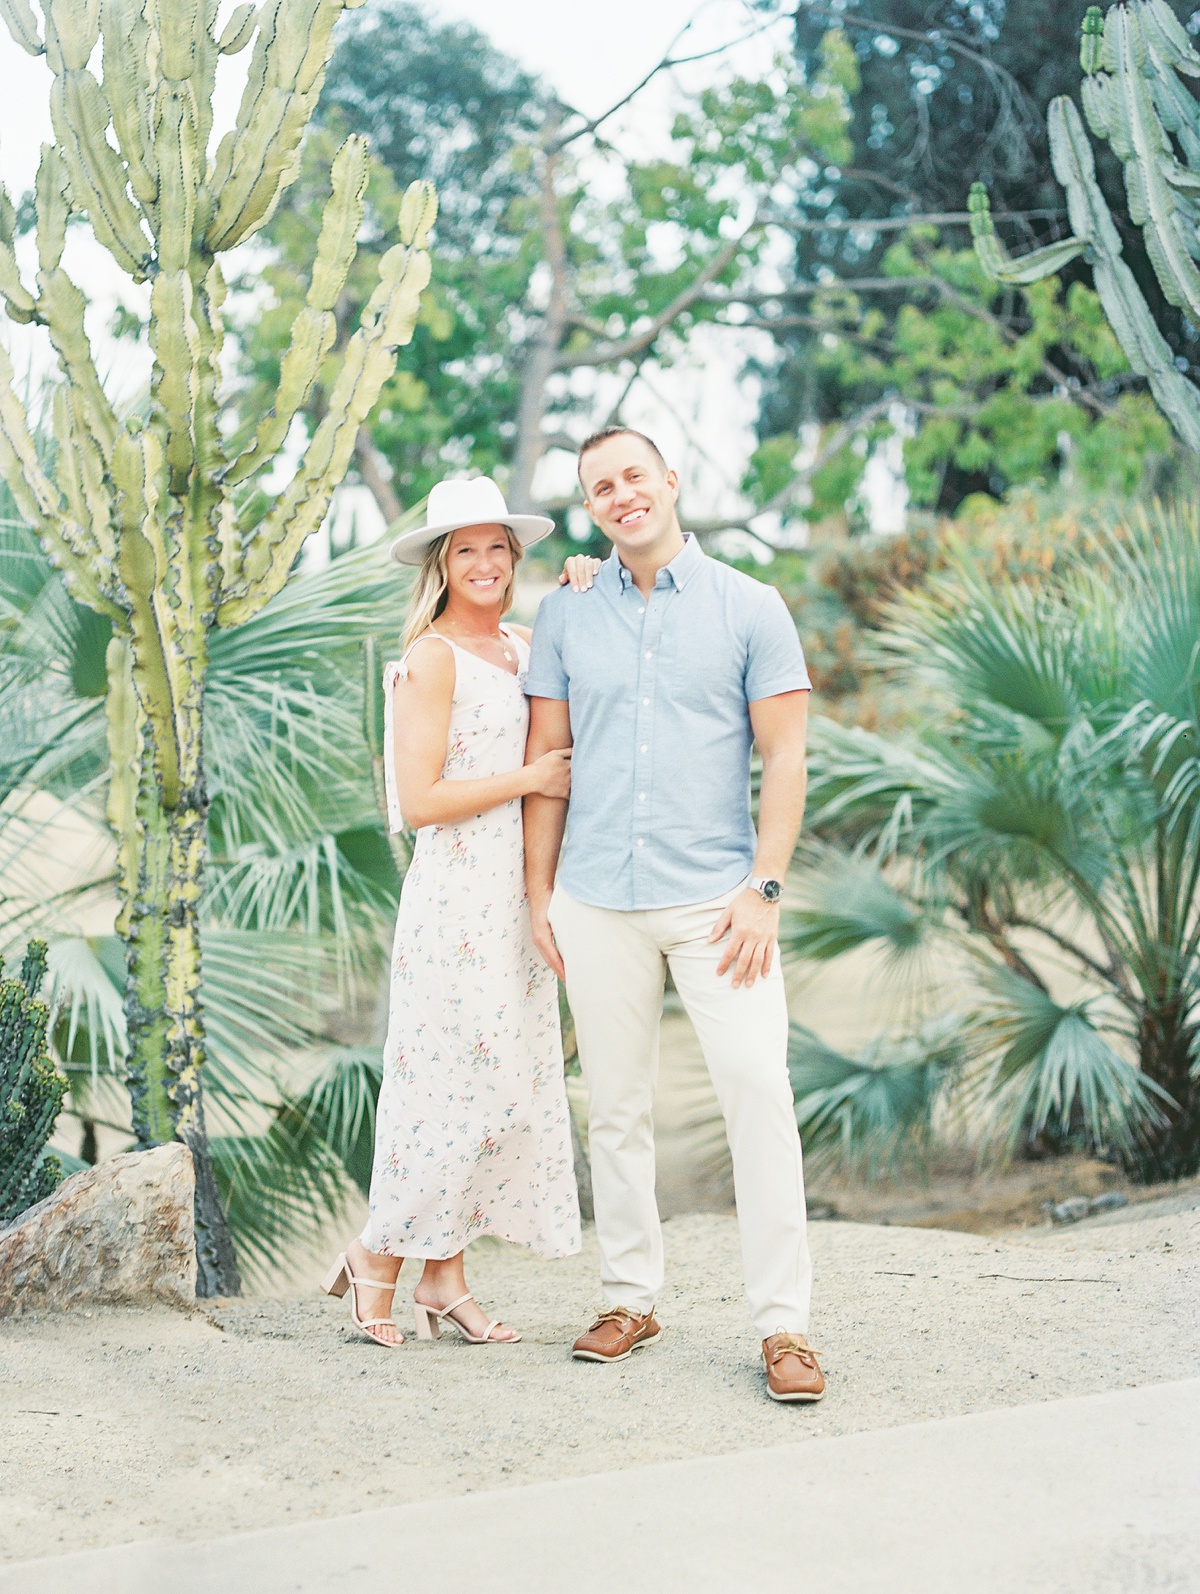 Engagement Photos With A Hat Cactus Garden Balboa Park Shot by San Diego Wedding Photographer Mandy Ford